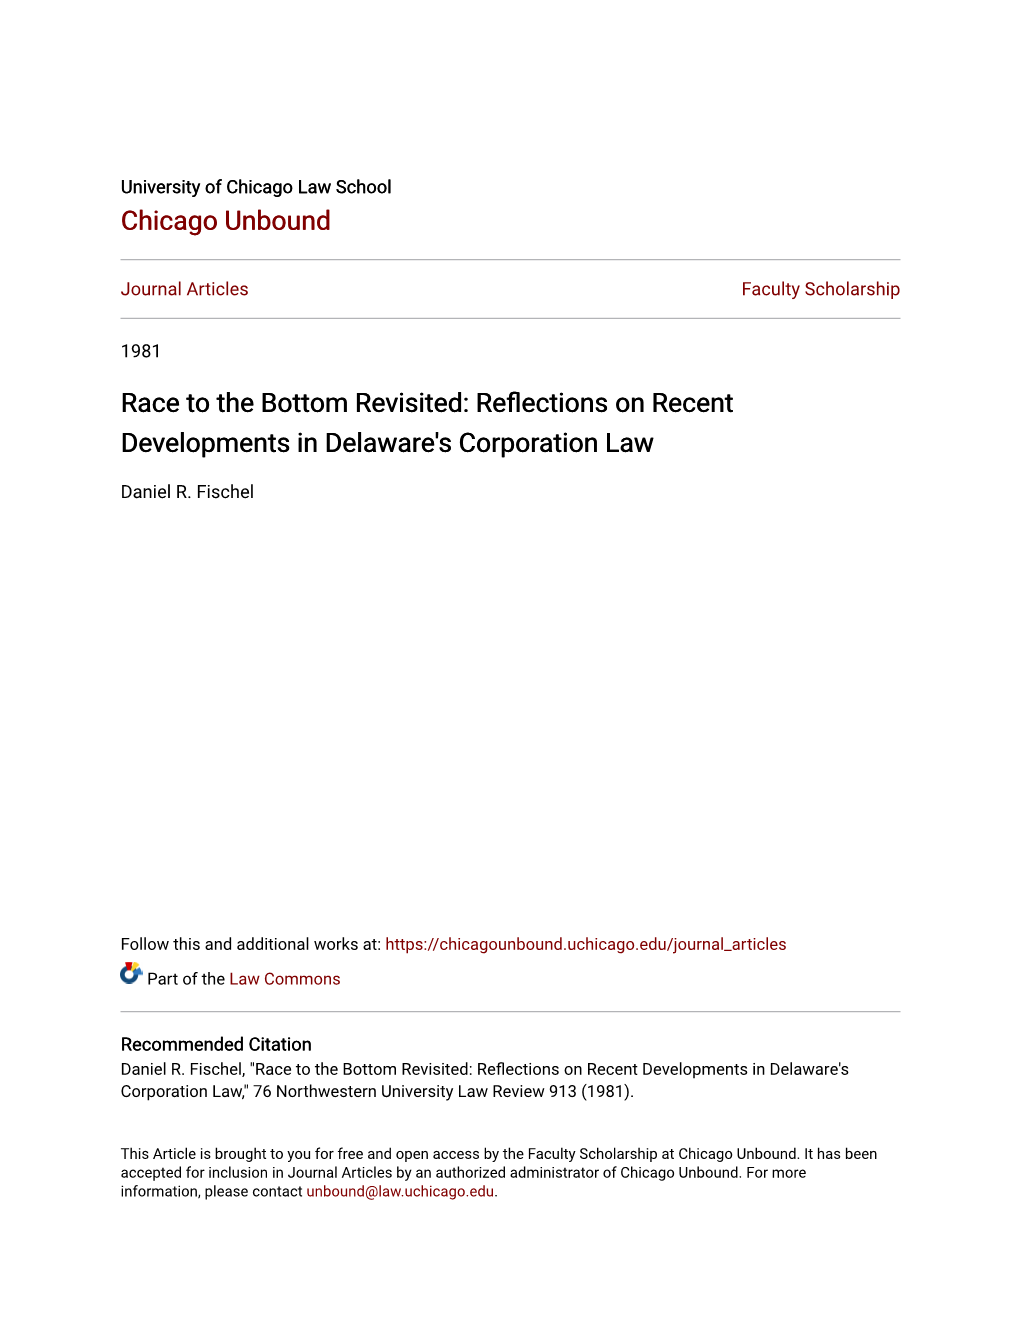 Race to the Bottom Revisited: Reflections on Recent Developments in Delaware's Corporation Law